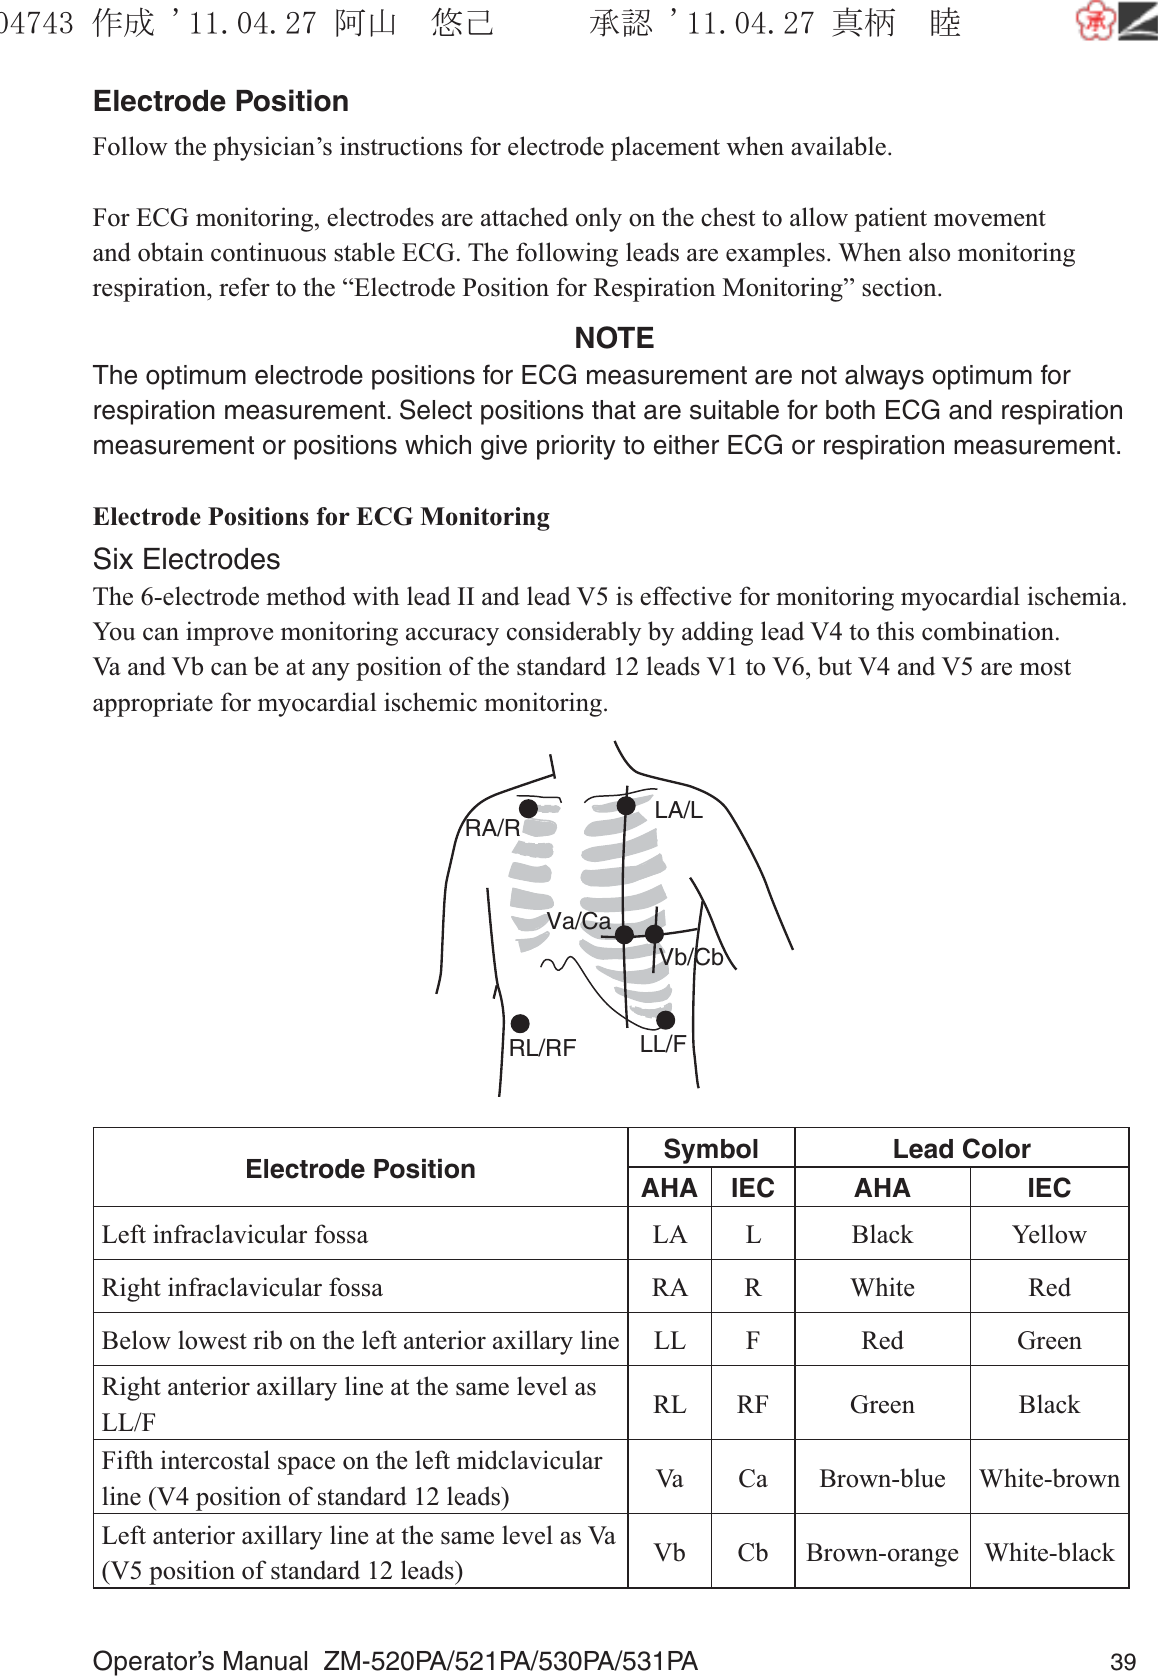 Operator’s Manual  ZM-520PA/521PA/530PA/531PA 39Electrode PositionFollow the physician’s instructions for electrode placement when available.For ECG monitoring, electrodes are attached only on the chest to allow patient movement and obtain continuous stable ECG. The following leads are examples. When also monitoring respiration, refer to the “Electrode Position for Respiration Monitoring” section.NOTEThe optimum electrode positions for ECG measurement are not always optimum for respiration measurement. Select positions that are suitable for both ECG and respiration measurement or positions which give priority to either ECG or respiration measurement.Electrode Positions for ECG MonitoringSix ElectrodesThe 6-electrode method with lead II and lead V5 is effective for monitoring myocardial ischemia.You can improve monitoring accuracy considerably by adding lead V4 to this combination. Va and Vb can be at any position of the standard 12 leads V1 to V6, but V4 and V5 are most appropriate for myocardial ischemic monitoring.RA/R LA/LRL/RF LL/FVa/CaVb/CbElectrode Position Symbol Lead ColorAHA IEC AHA IECLeft infraclavicular fossa LA L Black YellowRight infraclavicular fossa RA R White RedBelow lowest rib on the left anterior axillary line LL F Red GreenRight anterior axillary line at the same level as LL/F RL RF Green BlackFifth intercostal space on the left midclavicular line (V4 position of standard 12 leads) Va Ca Brown-blue White-brownLeft anterior axillary line at the same level as Va (V5 position of standard 12 leads) Vb Cb Brown-orange White-black૞ᚑ㒙ጊޓᖘᏆ ᛚ⹺⌀ᨩޓ⌬